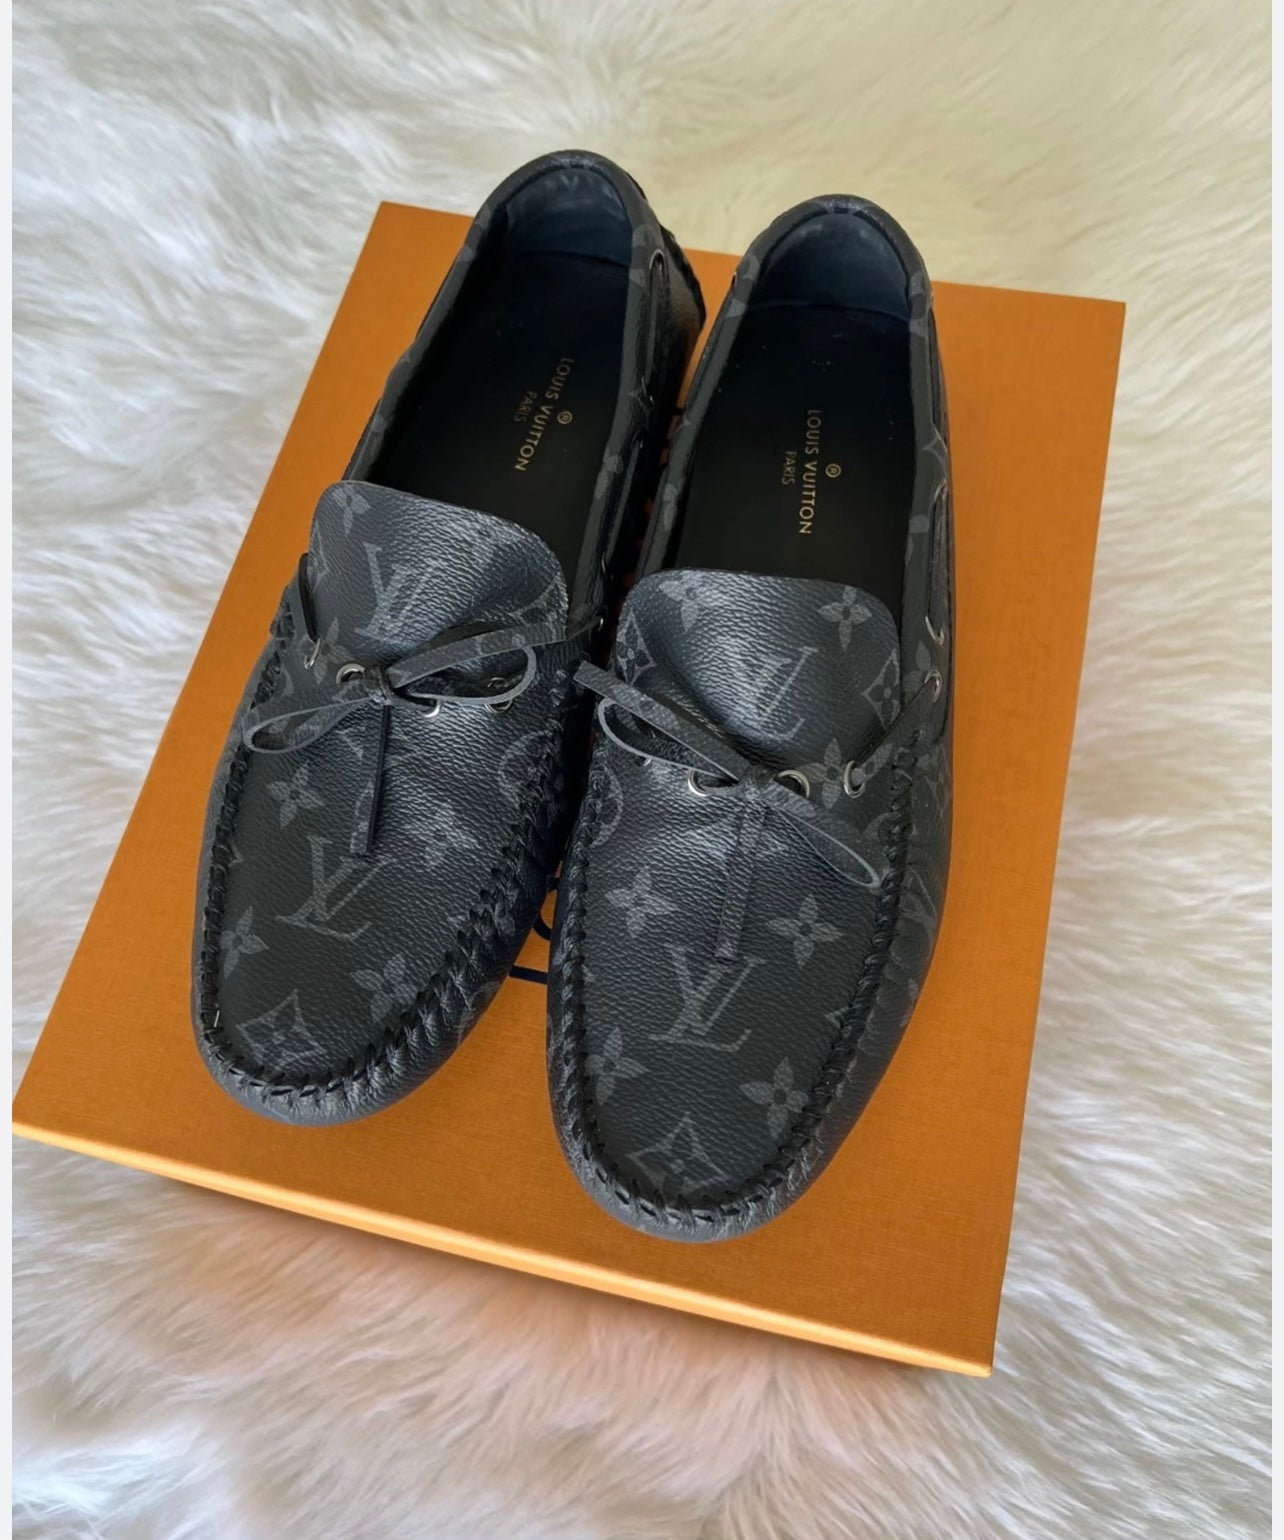 Lv arizona loafers driver's leather shoes brown monogram clearance